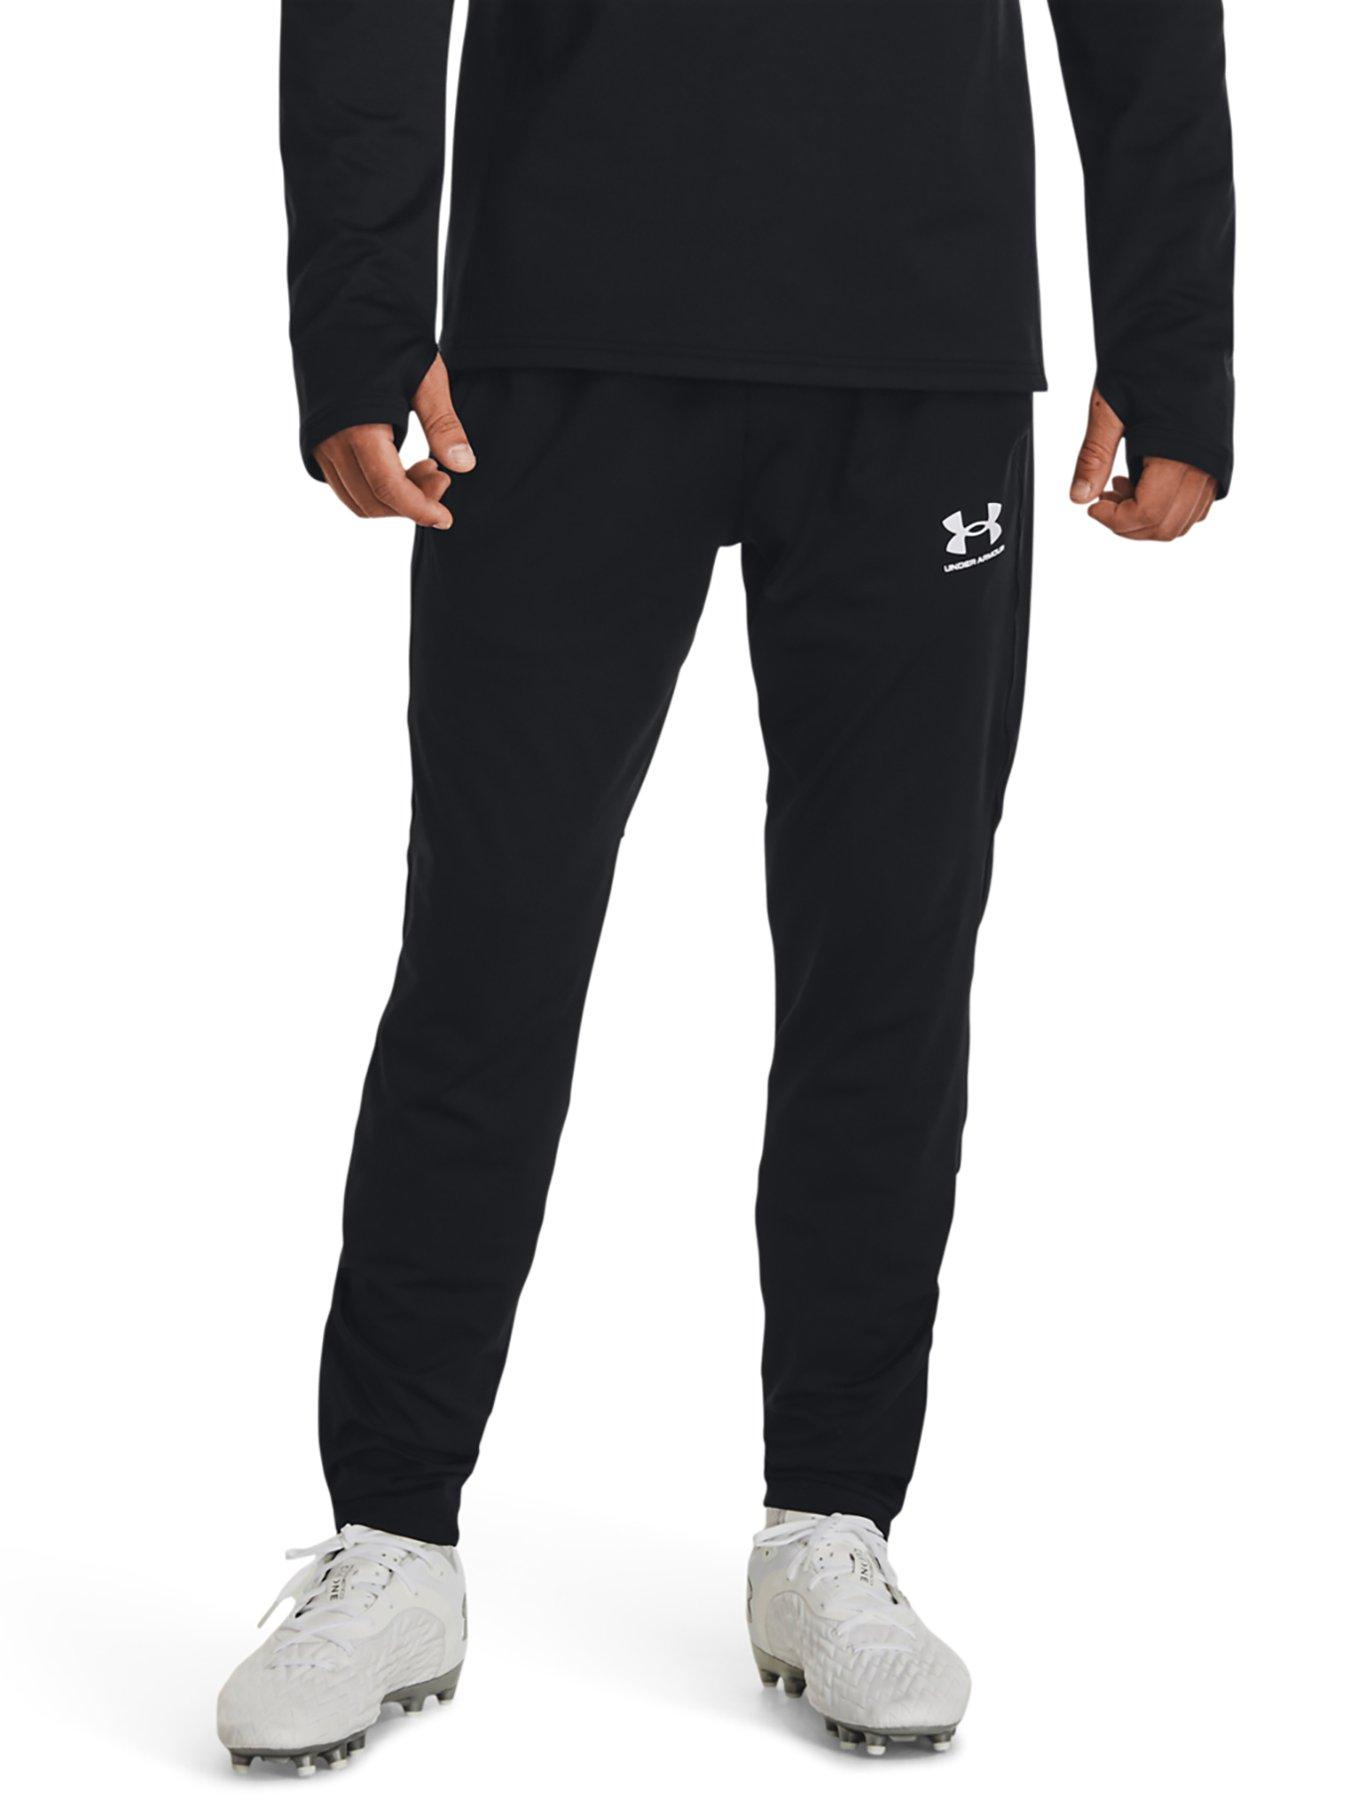 UNDER ARMOUR Mens Challenger Pant - Black | very.co.uk